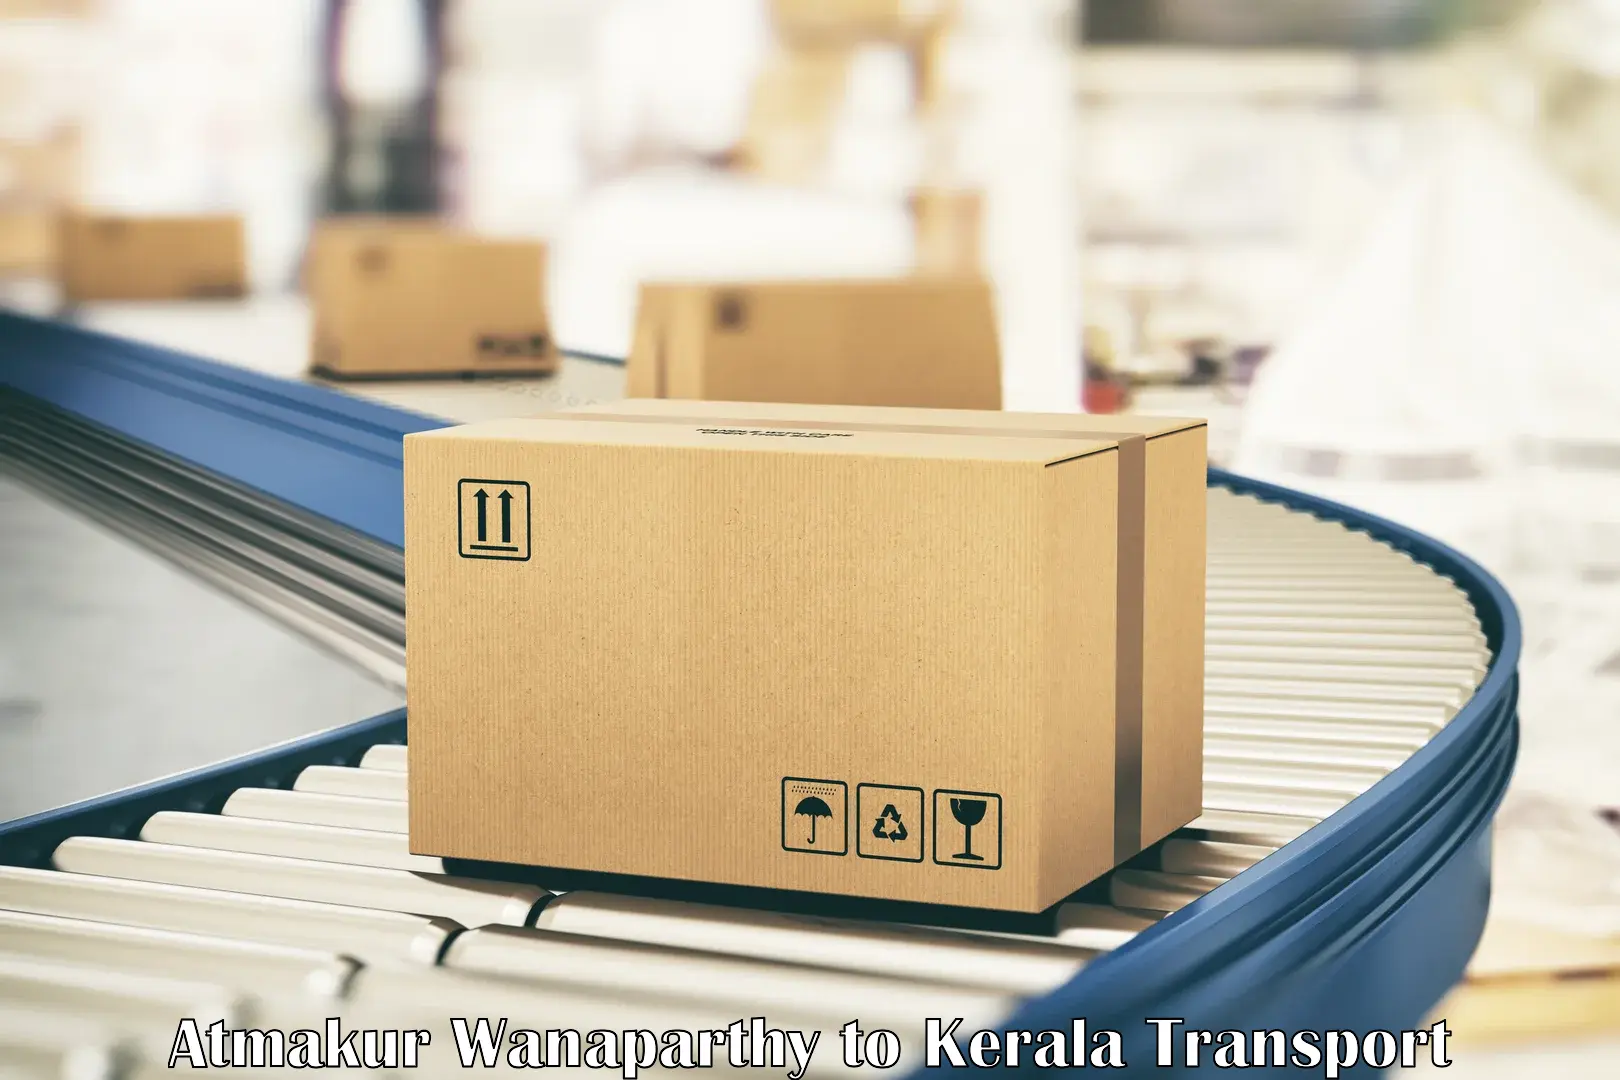 Nationwide transport services Atmakur Wanaparthy to Kollam